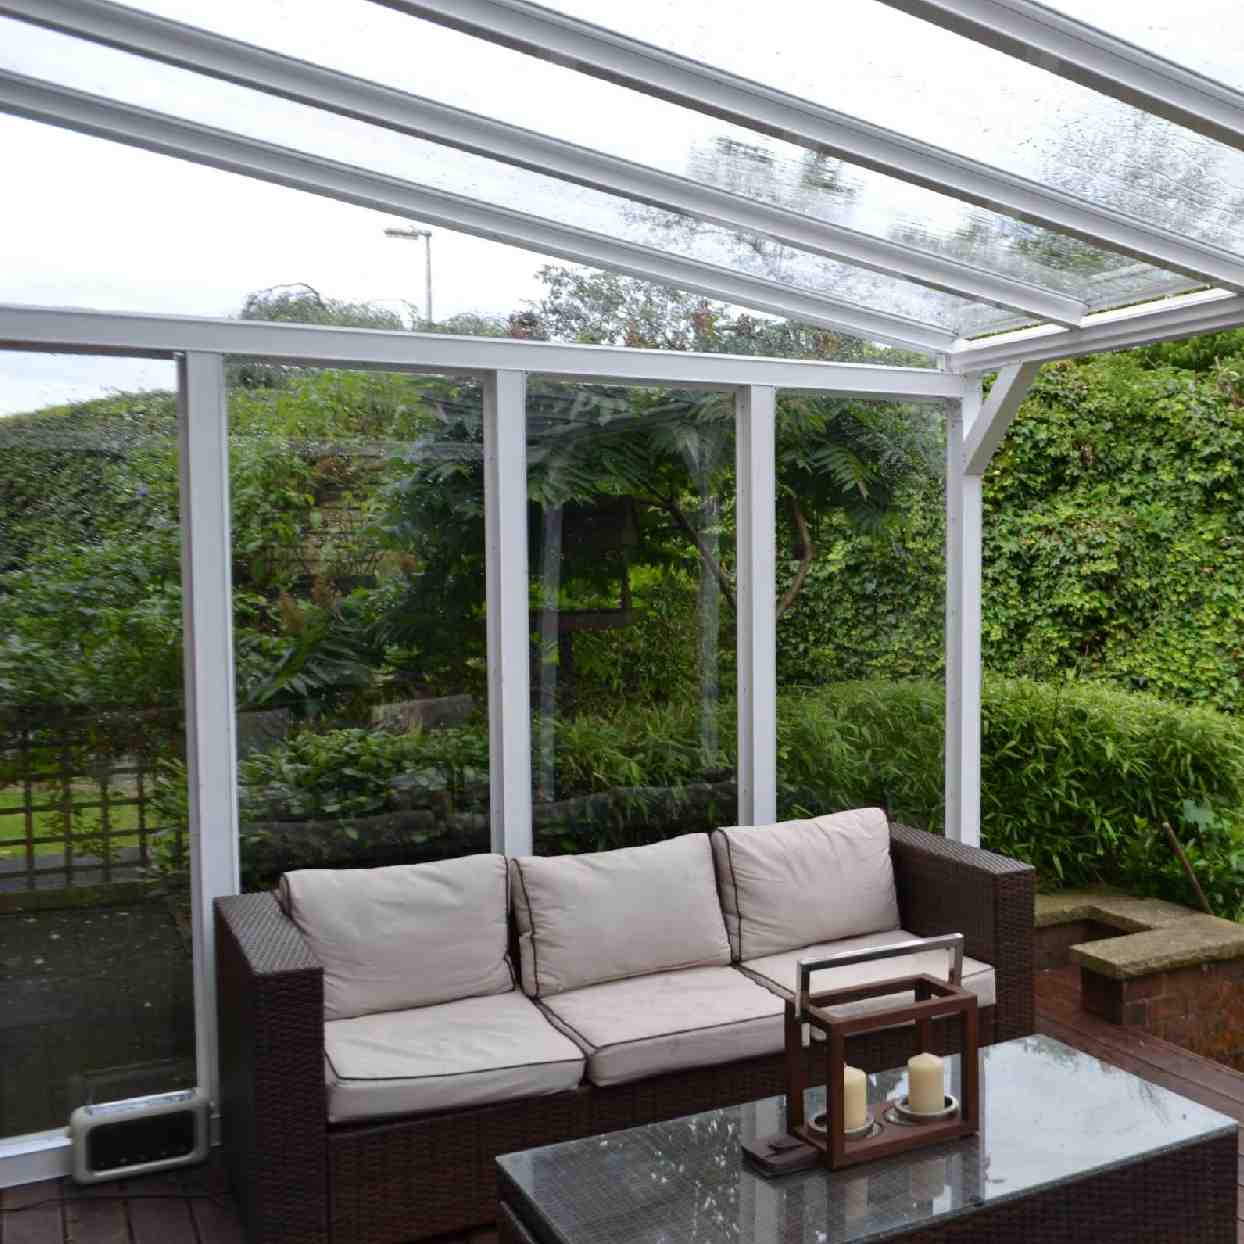 Buy Omega Verandah White with 16mm Polycarbonate Glazing - 5.2m (W) x 2.0m (P), (3) Supporting Posts online today